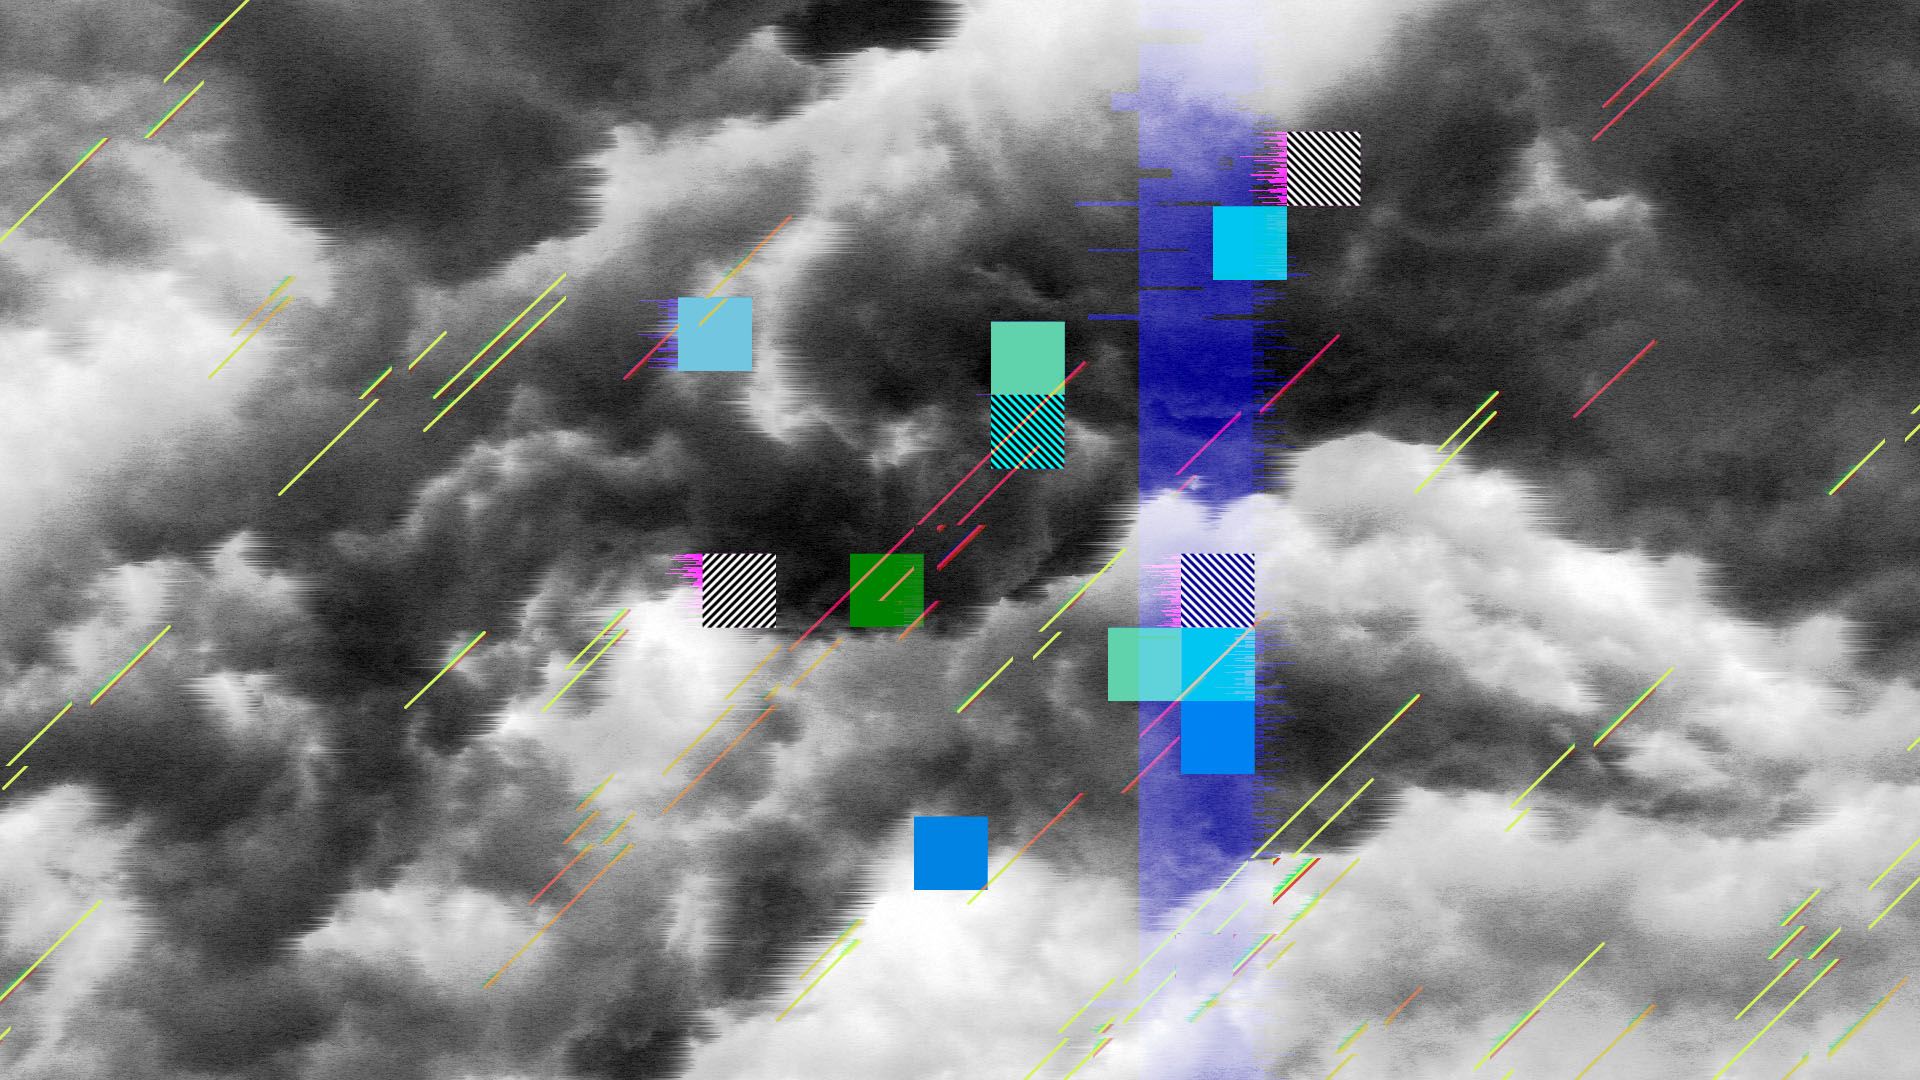 Illustration of a storm cloud interrupted by cubes and glitches